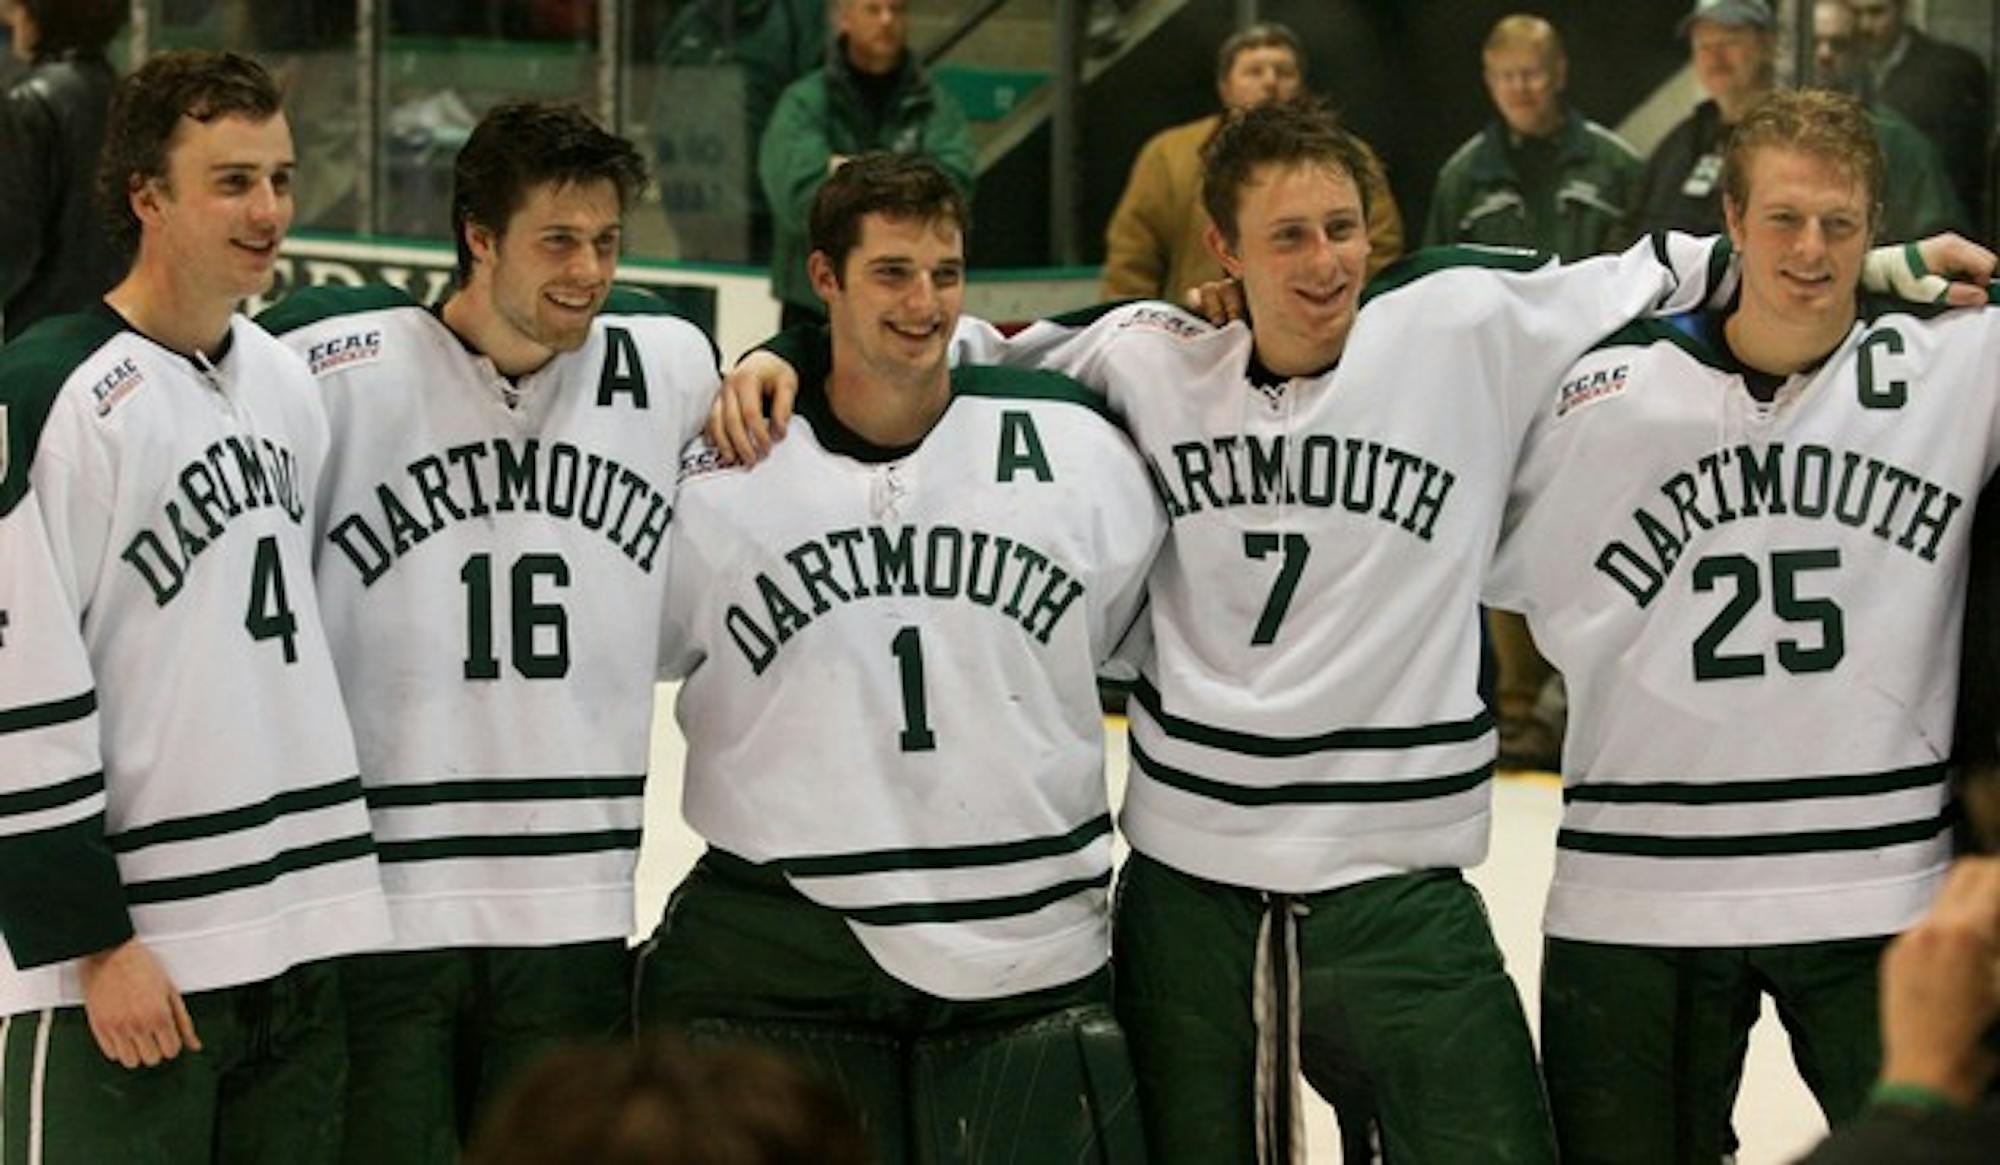 Men's hockey sent its seniors off with a win in their last home game.